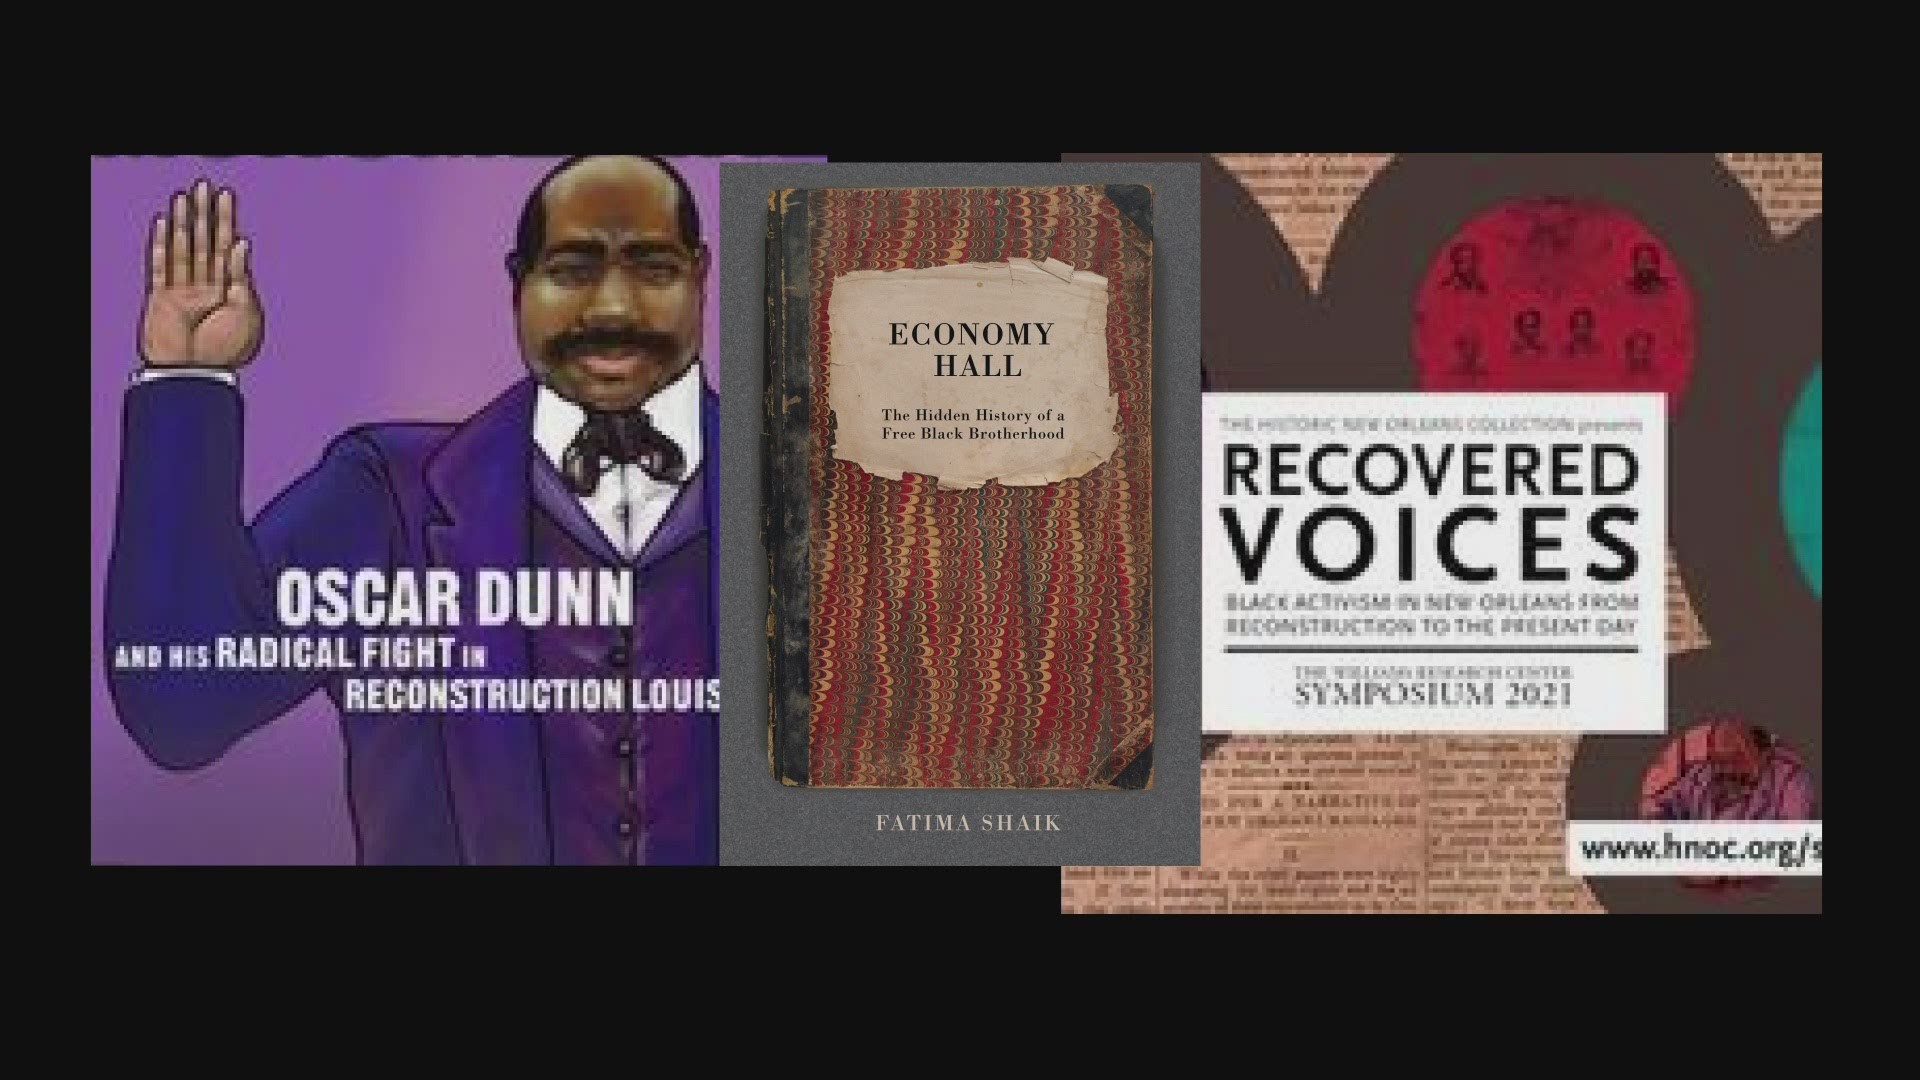 The Historic New Orleans Collection plans to do that by featuring three authors behind publications that amplify those lost voices.